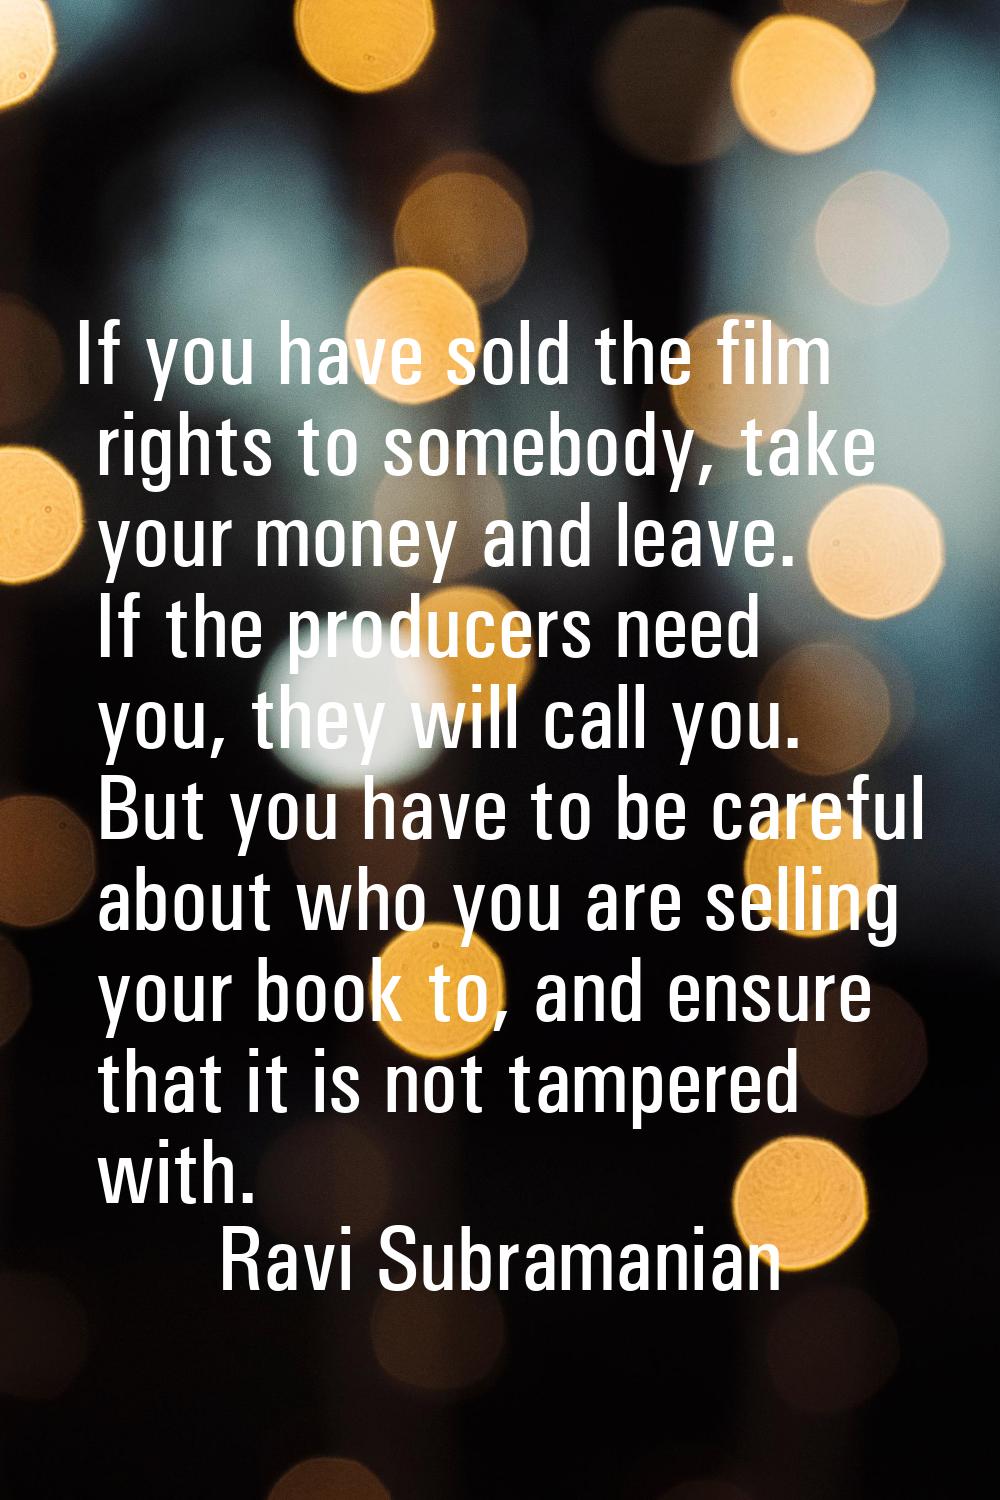 If you have sold the film rights to somebody, take your money and leave. If the producers need you,